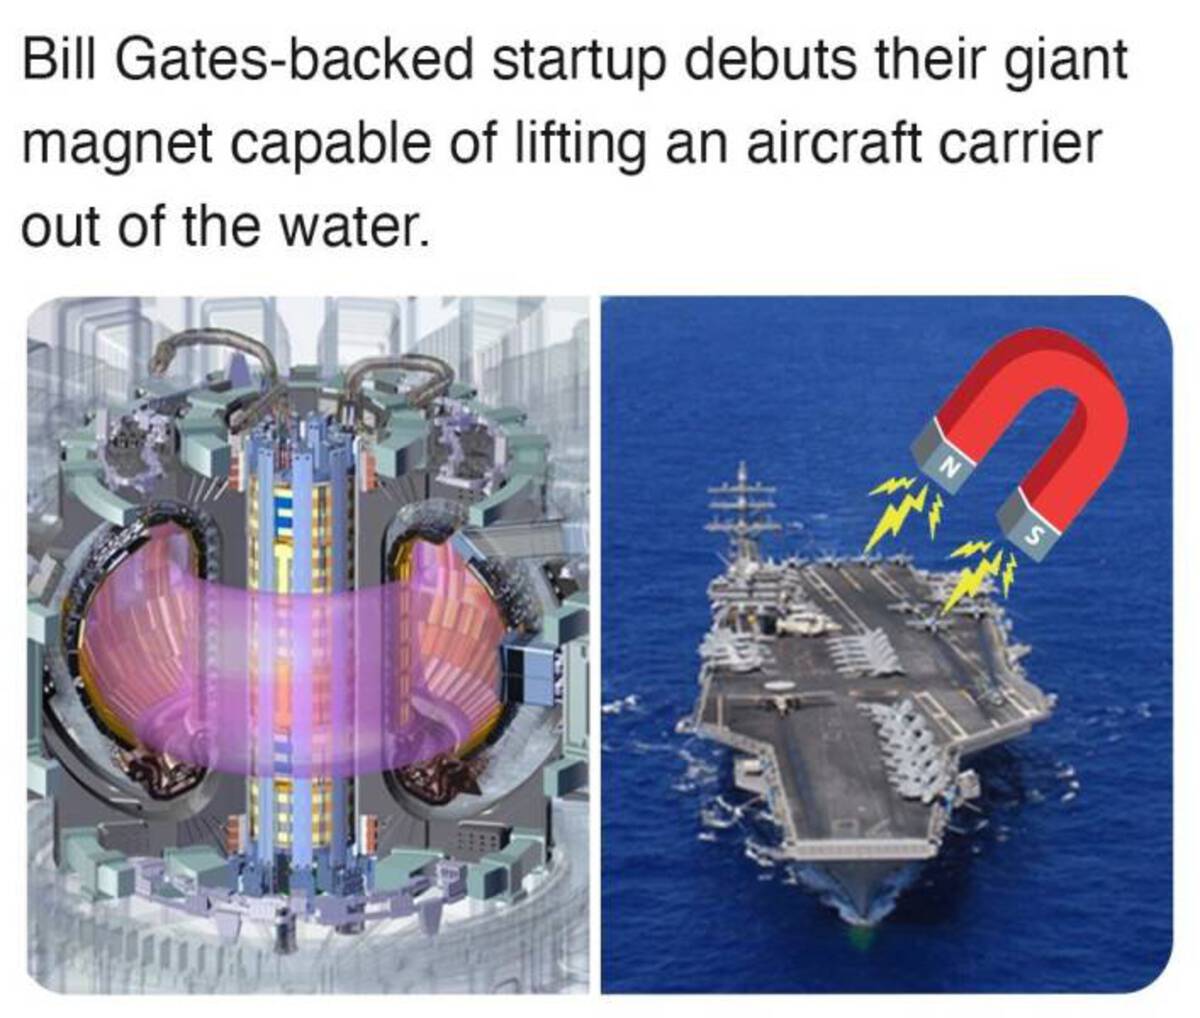 iter magnit - Bill Gatesbacked startup debuts their giant magnet capable of lifting an aircraft carrier out of the water. S